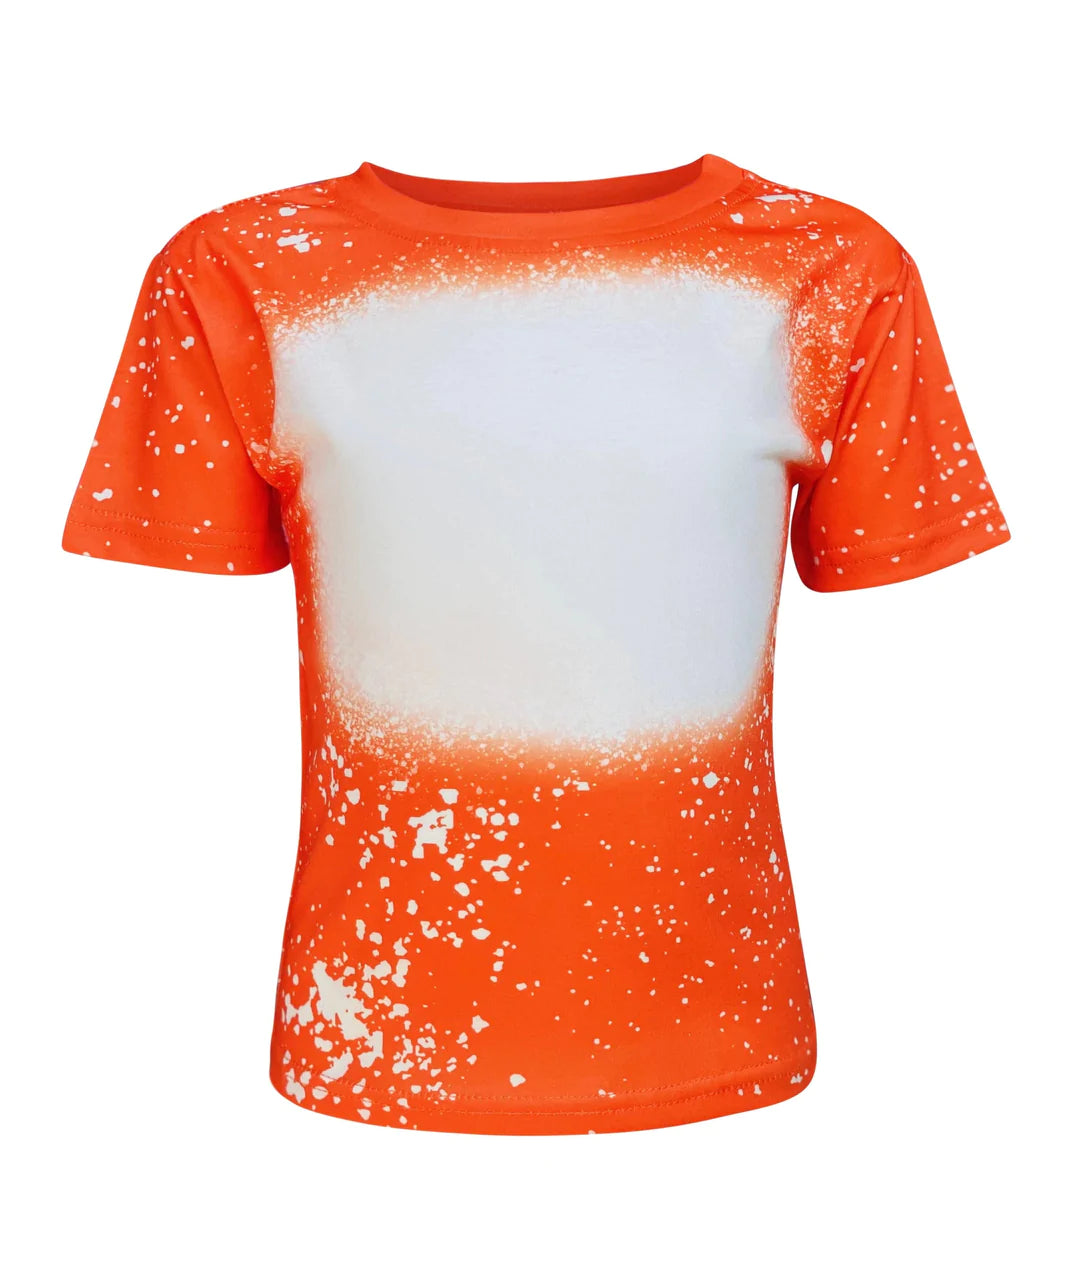 Toddler Unisex Faux Bleached Shirts, ready for Sublimation or Screen Transfer